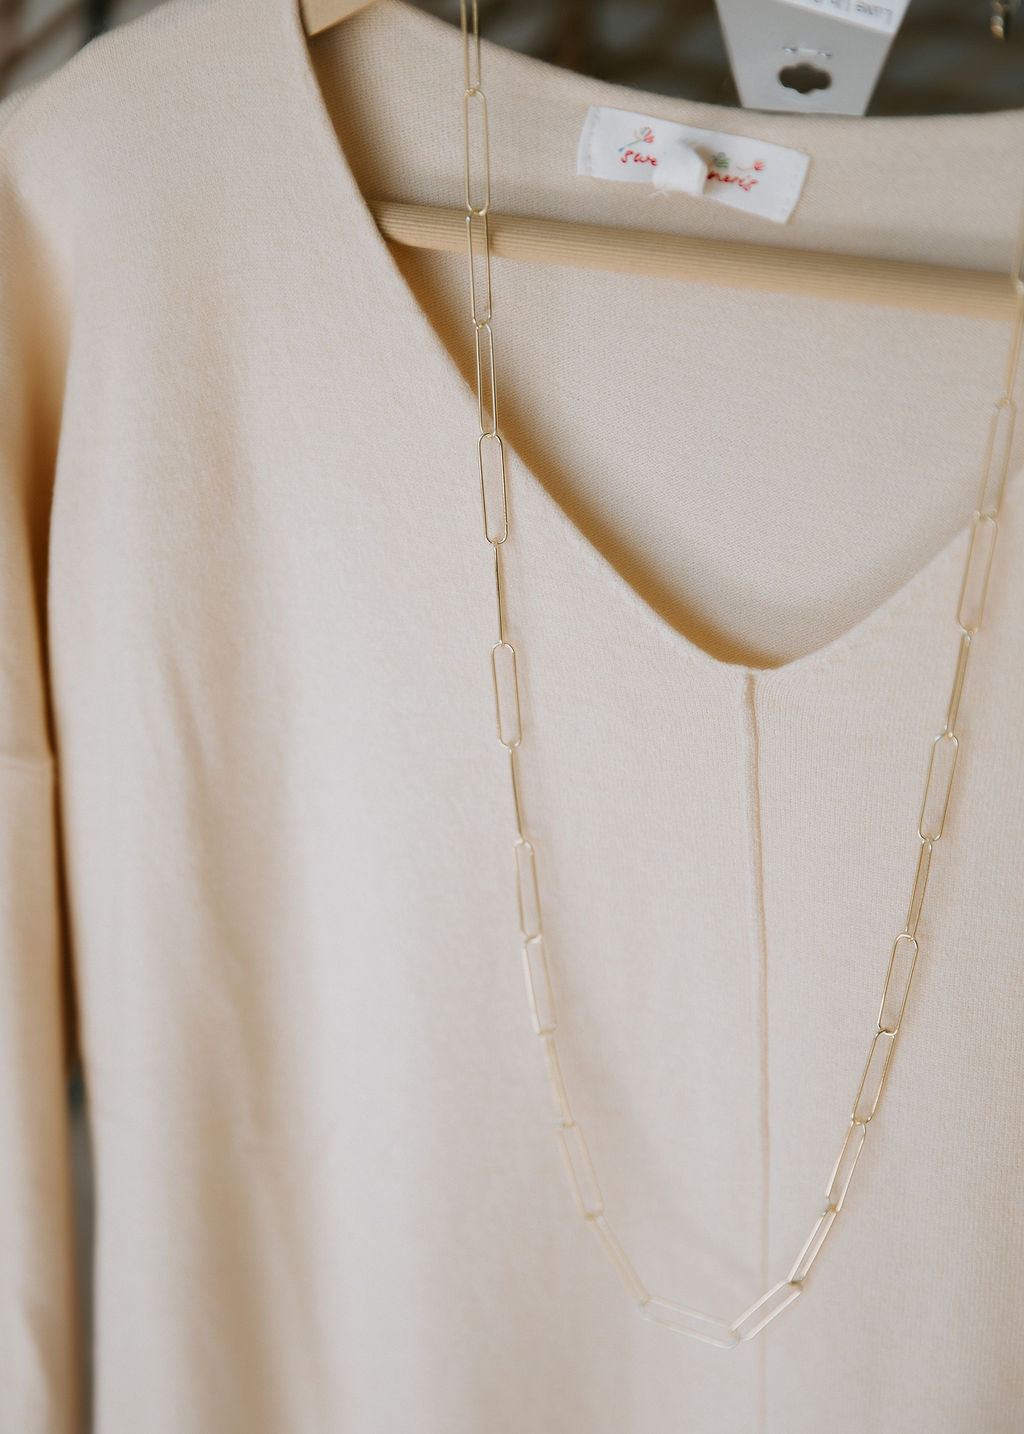 Luxe Up Chain Necklace